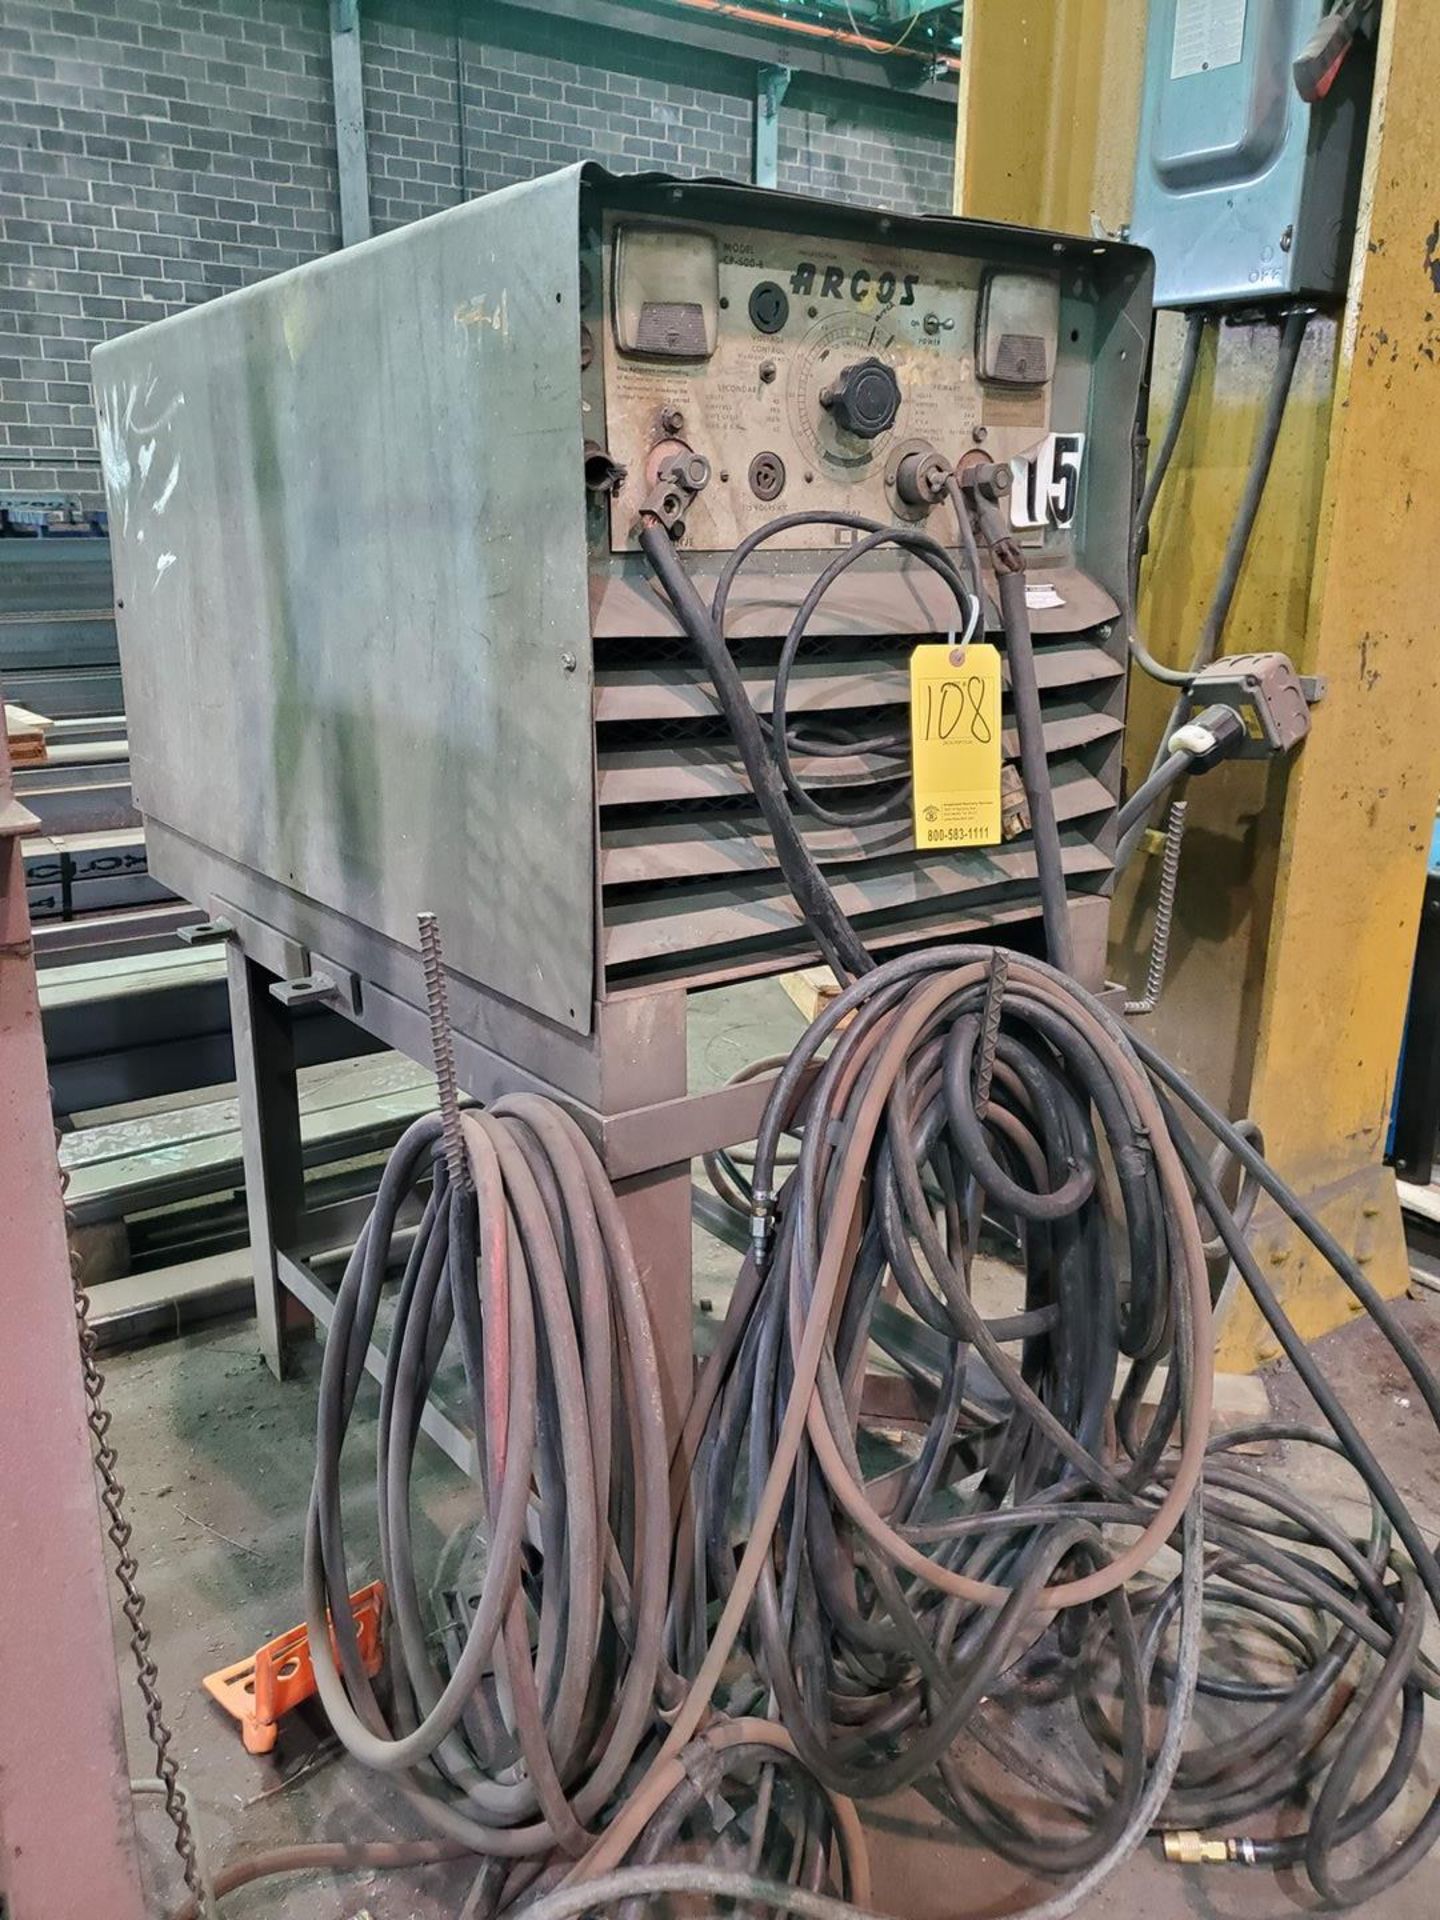 Miller A-CP-500-E Arc Welder 230/460V, 70/35A,3PH, 50/60HZ; W/ S-54A Wire Feeder - Image 3 of 9